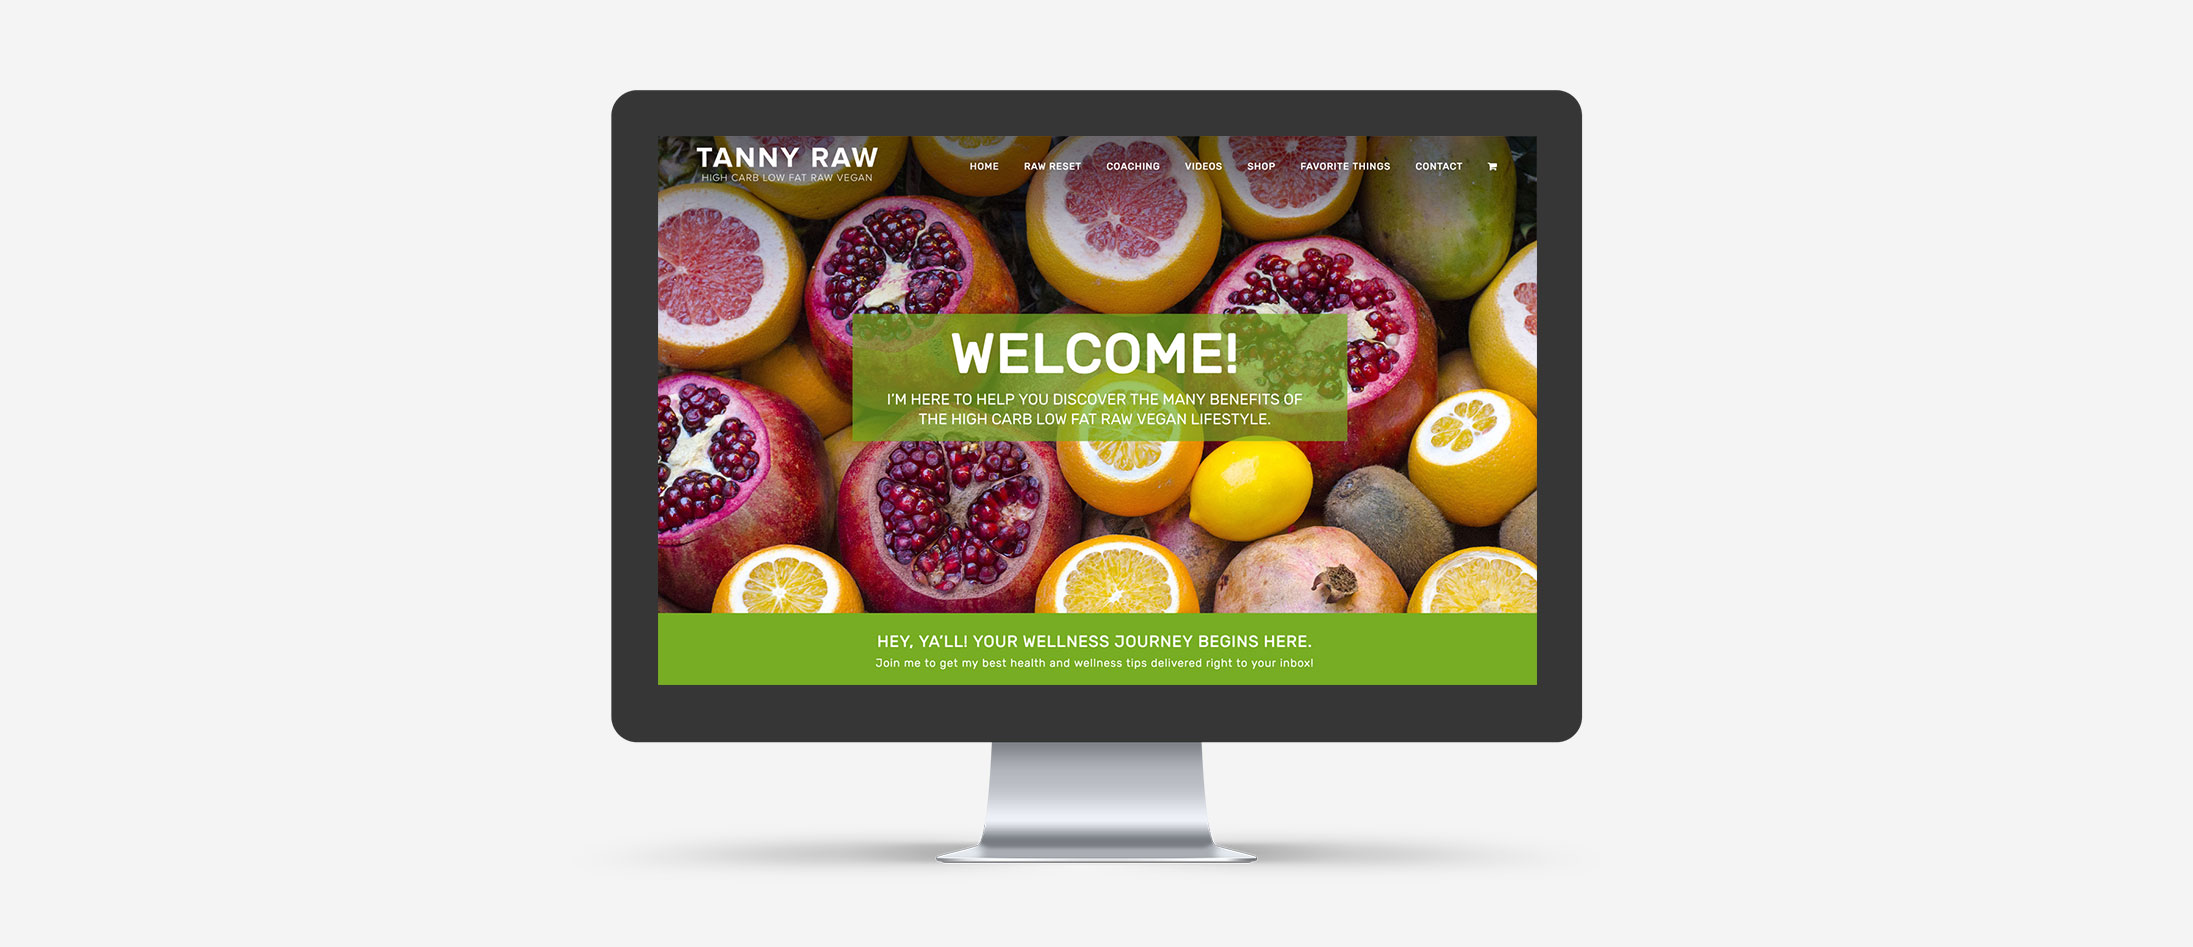 Mockup of the new Tanny Raw WordPress website homepage loaded on a large desktop screen